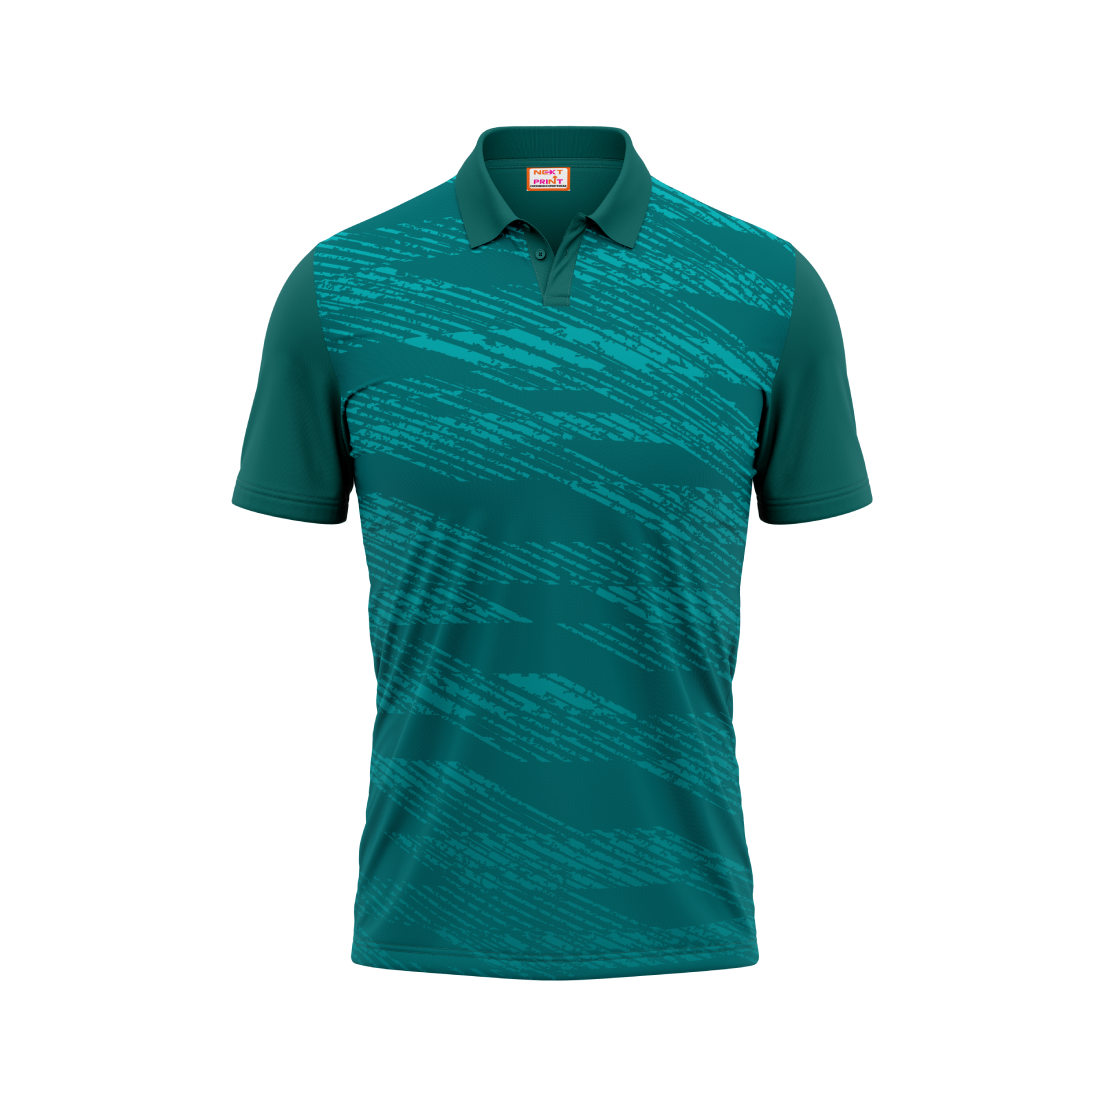 Polo Neck Printed Jersey Green NP002